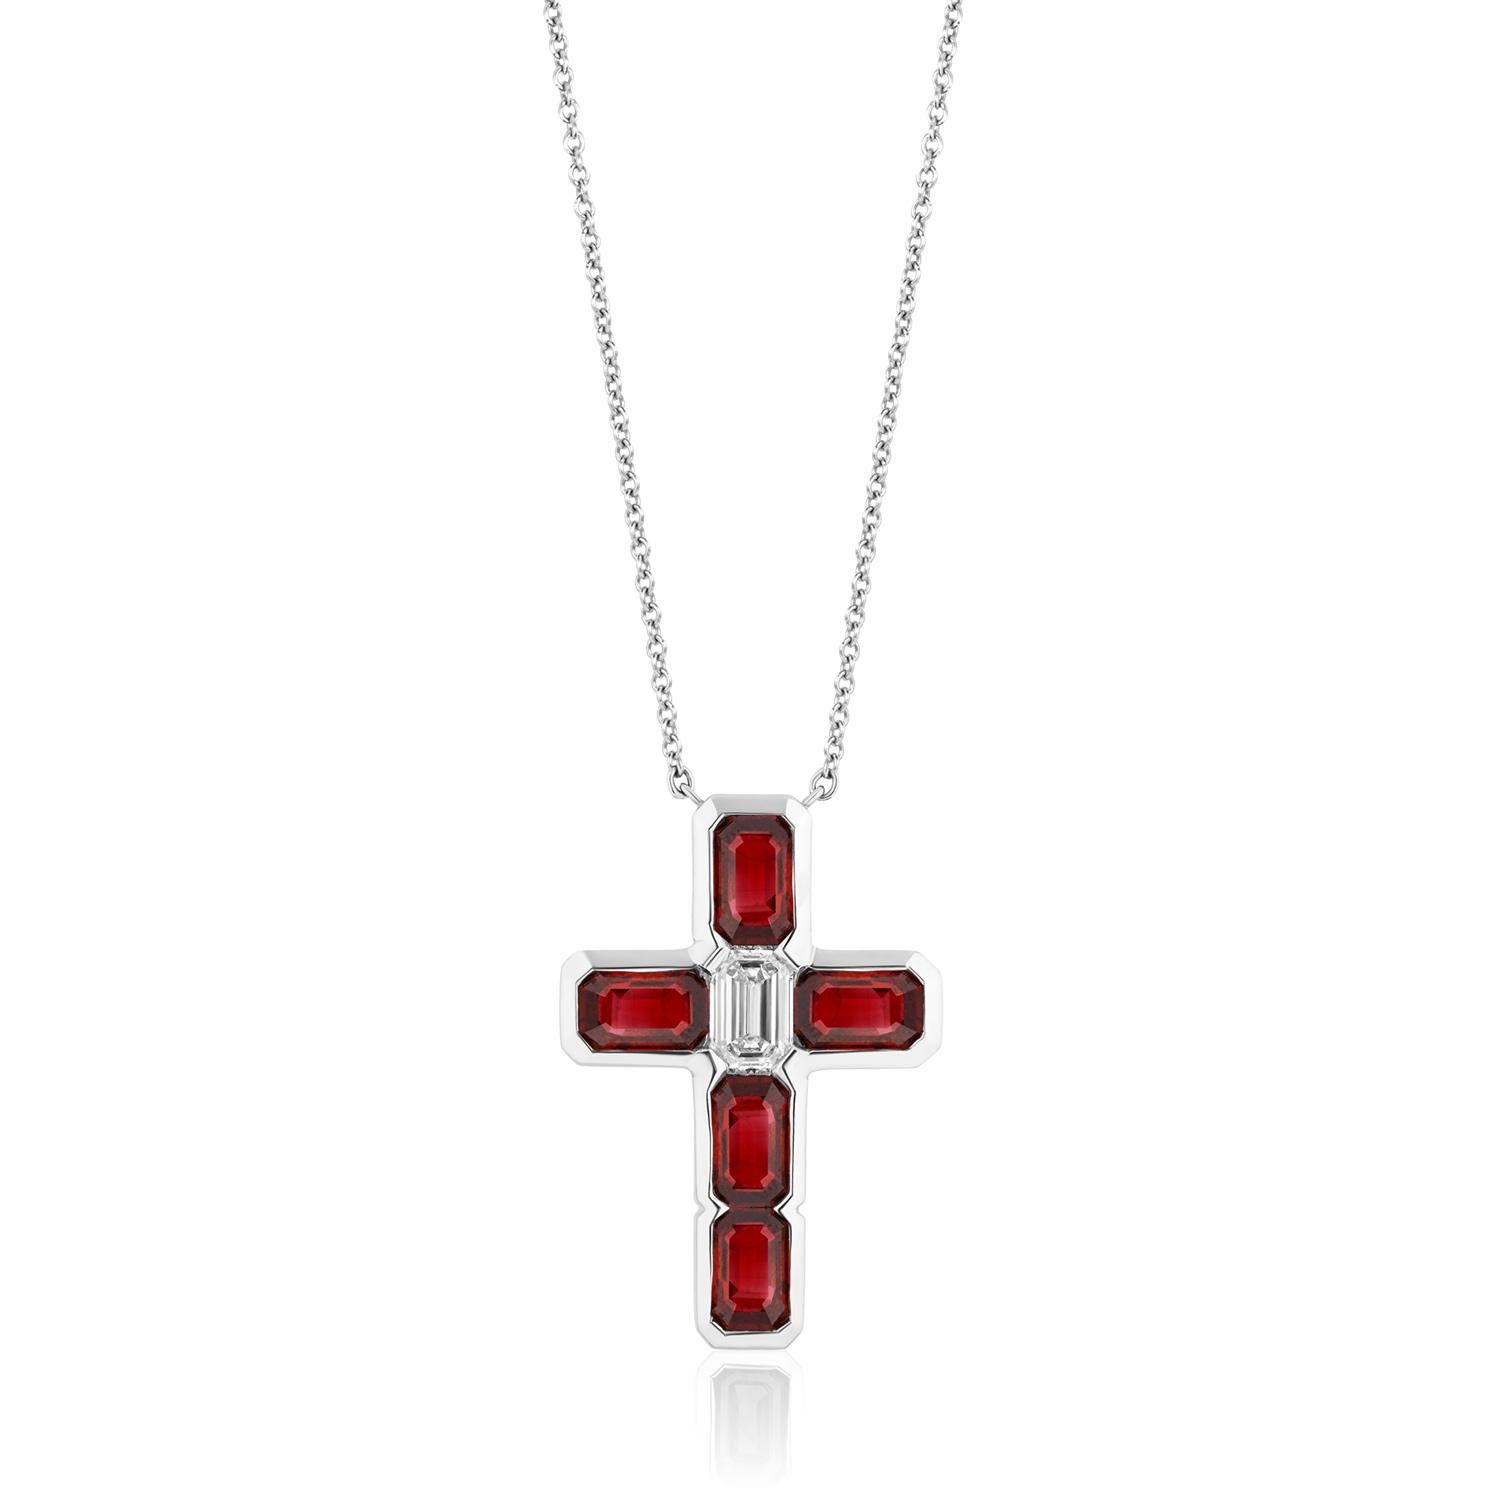 A Fine Ruby and Diamond Cross.
Emerald Cut Rubies and Diamond set in this beautiful and bold Cross.
5 Emerald Cut Rubies weighing 3.13 Carats. 1 Diamond Weighing 0.55 Carats.
Set in Platinum
Chain measures 16 inches. Can be lengthened. 